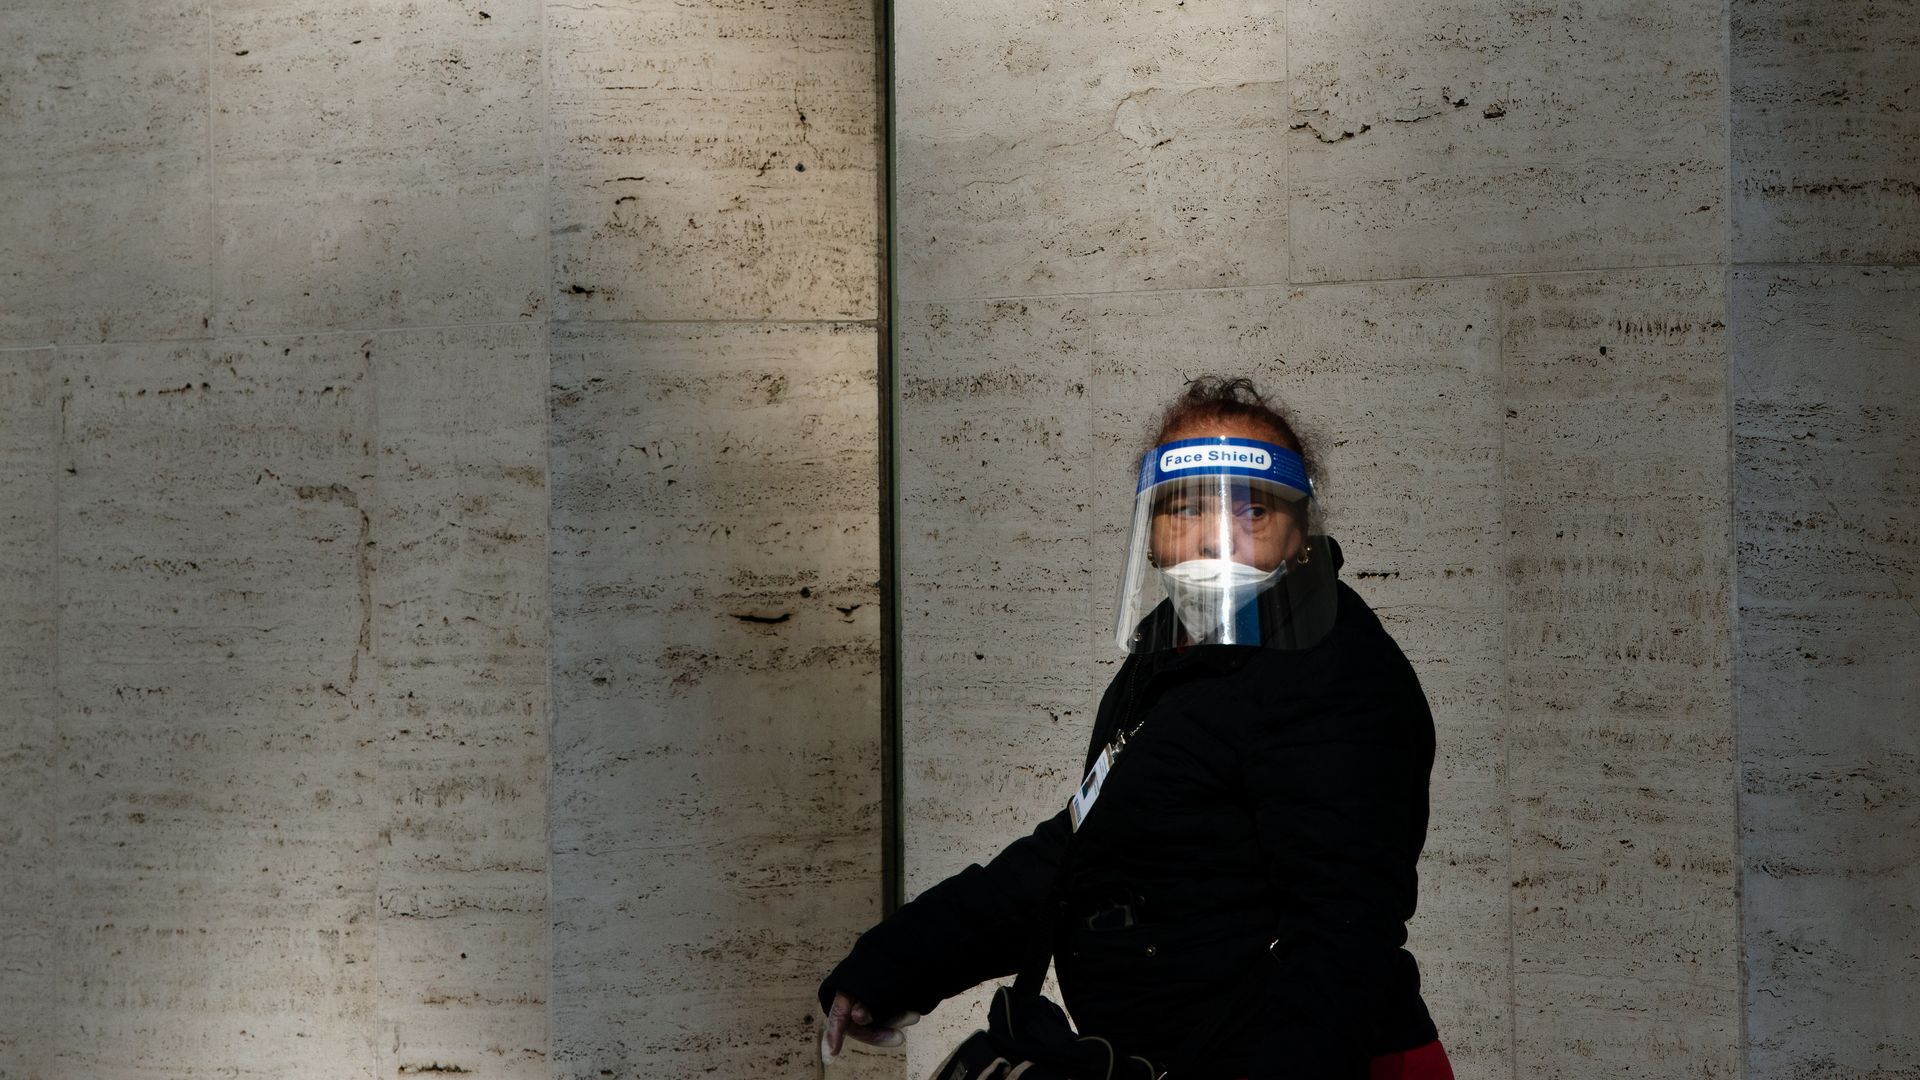 In this image, a woman wears a face shield